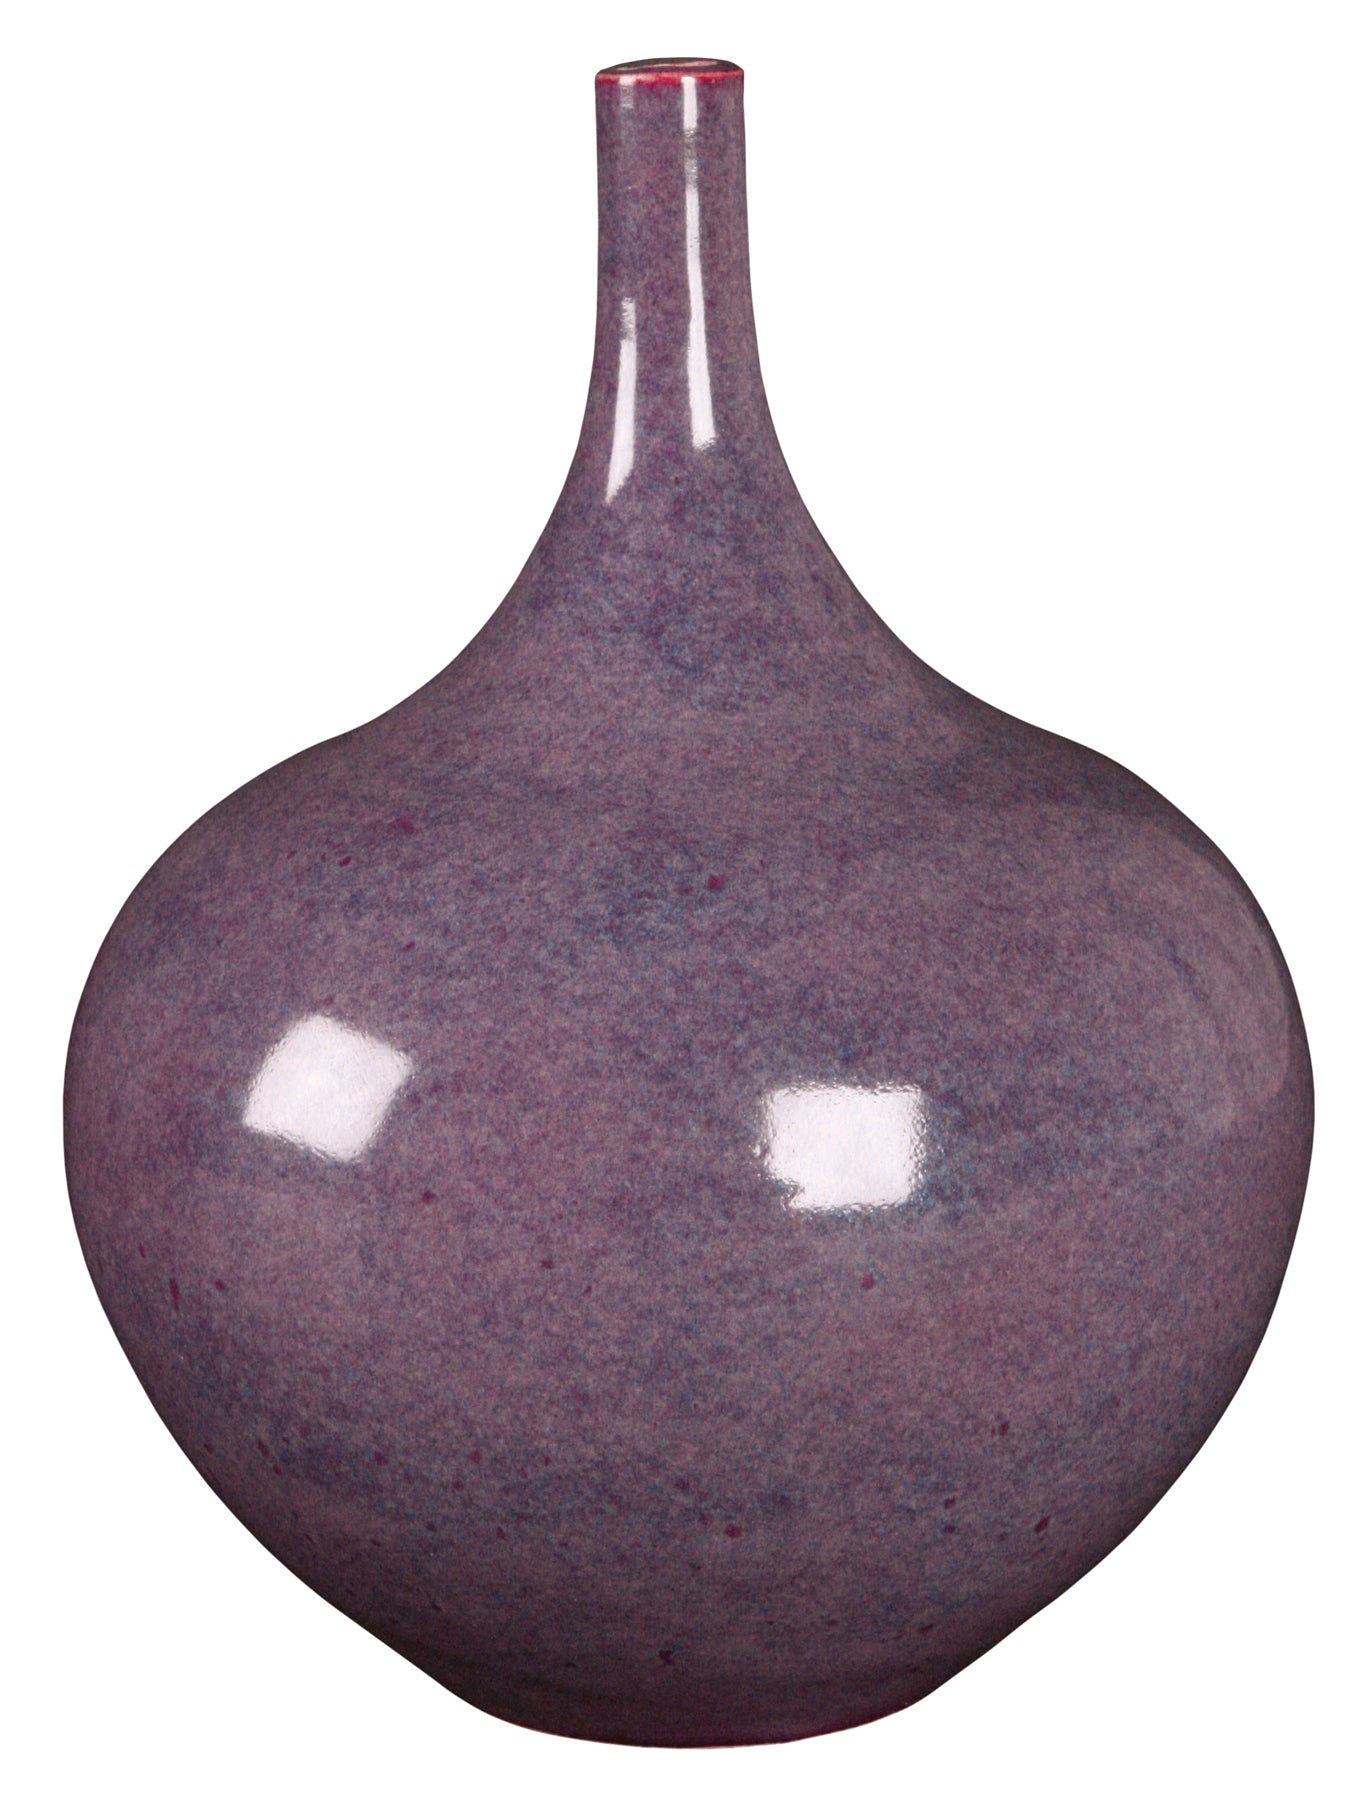 bigceramicstore-com,Amaco Potters Choice PC28 Frosted Turquoise (AP)(O),Amaco,Glazes - Mid-fire